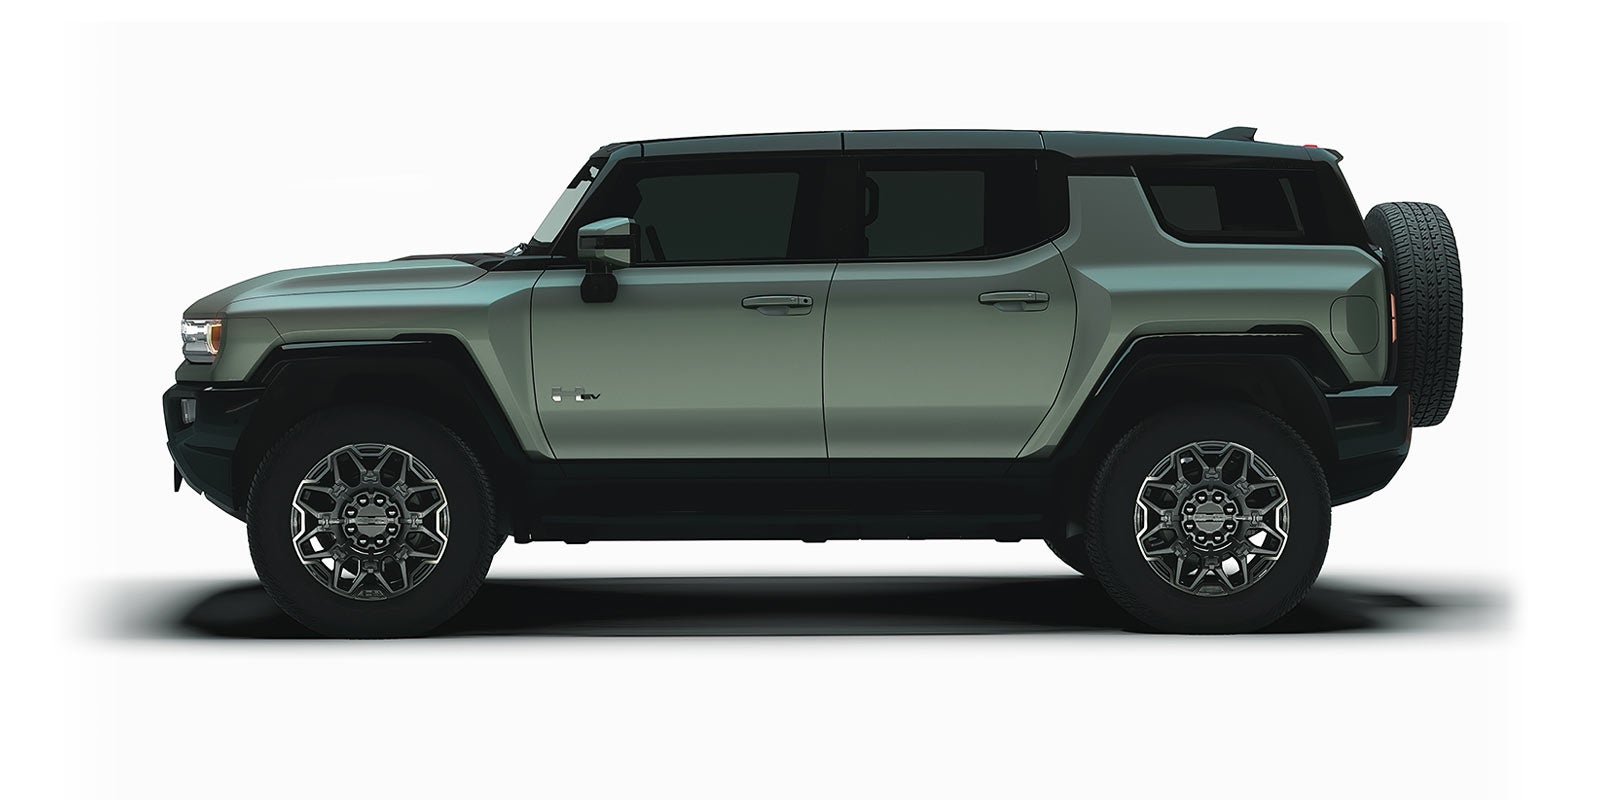 hummer ev pickup and hummer ev | Sommer's Buick GMC in Mequon WI